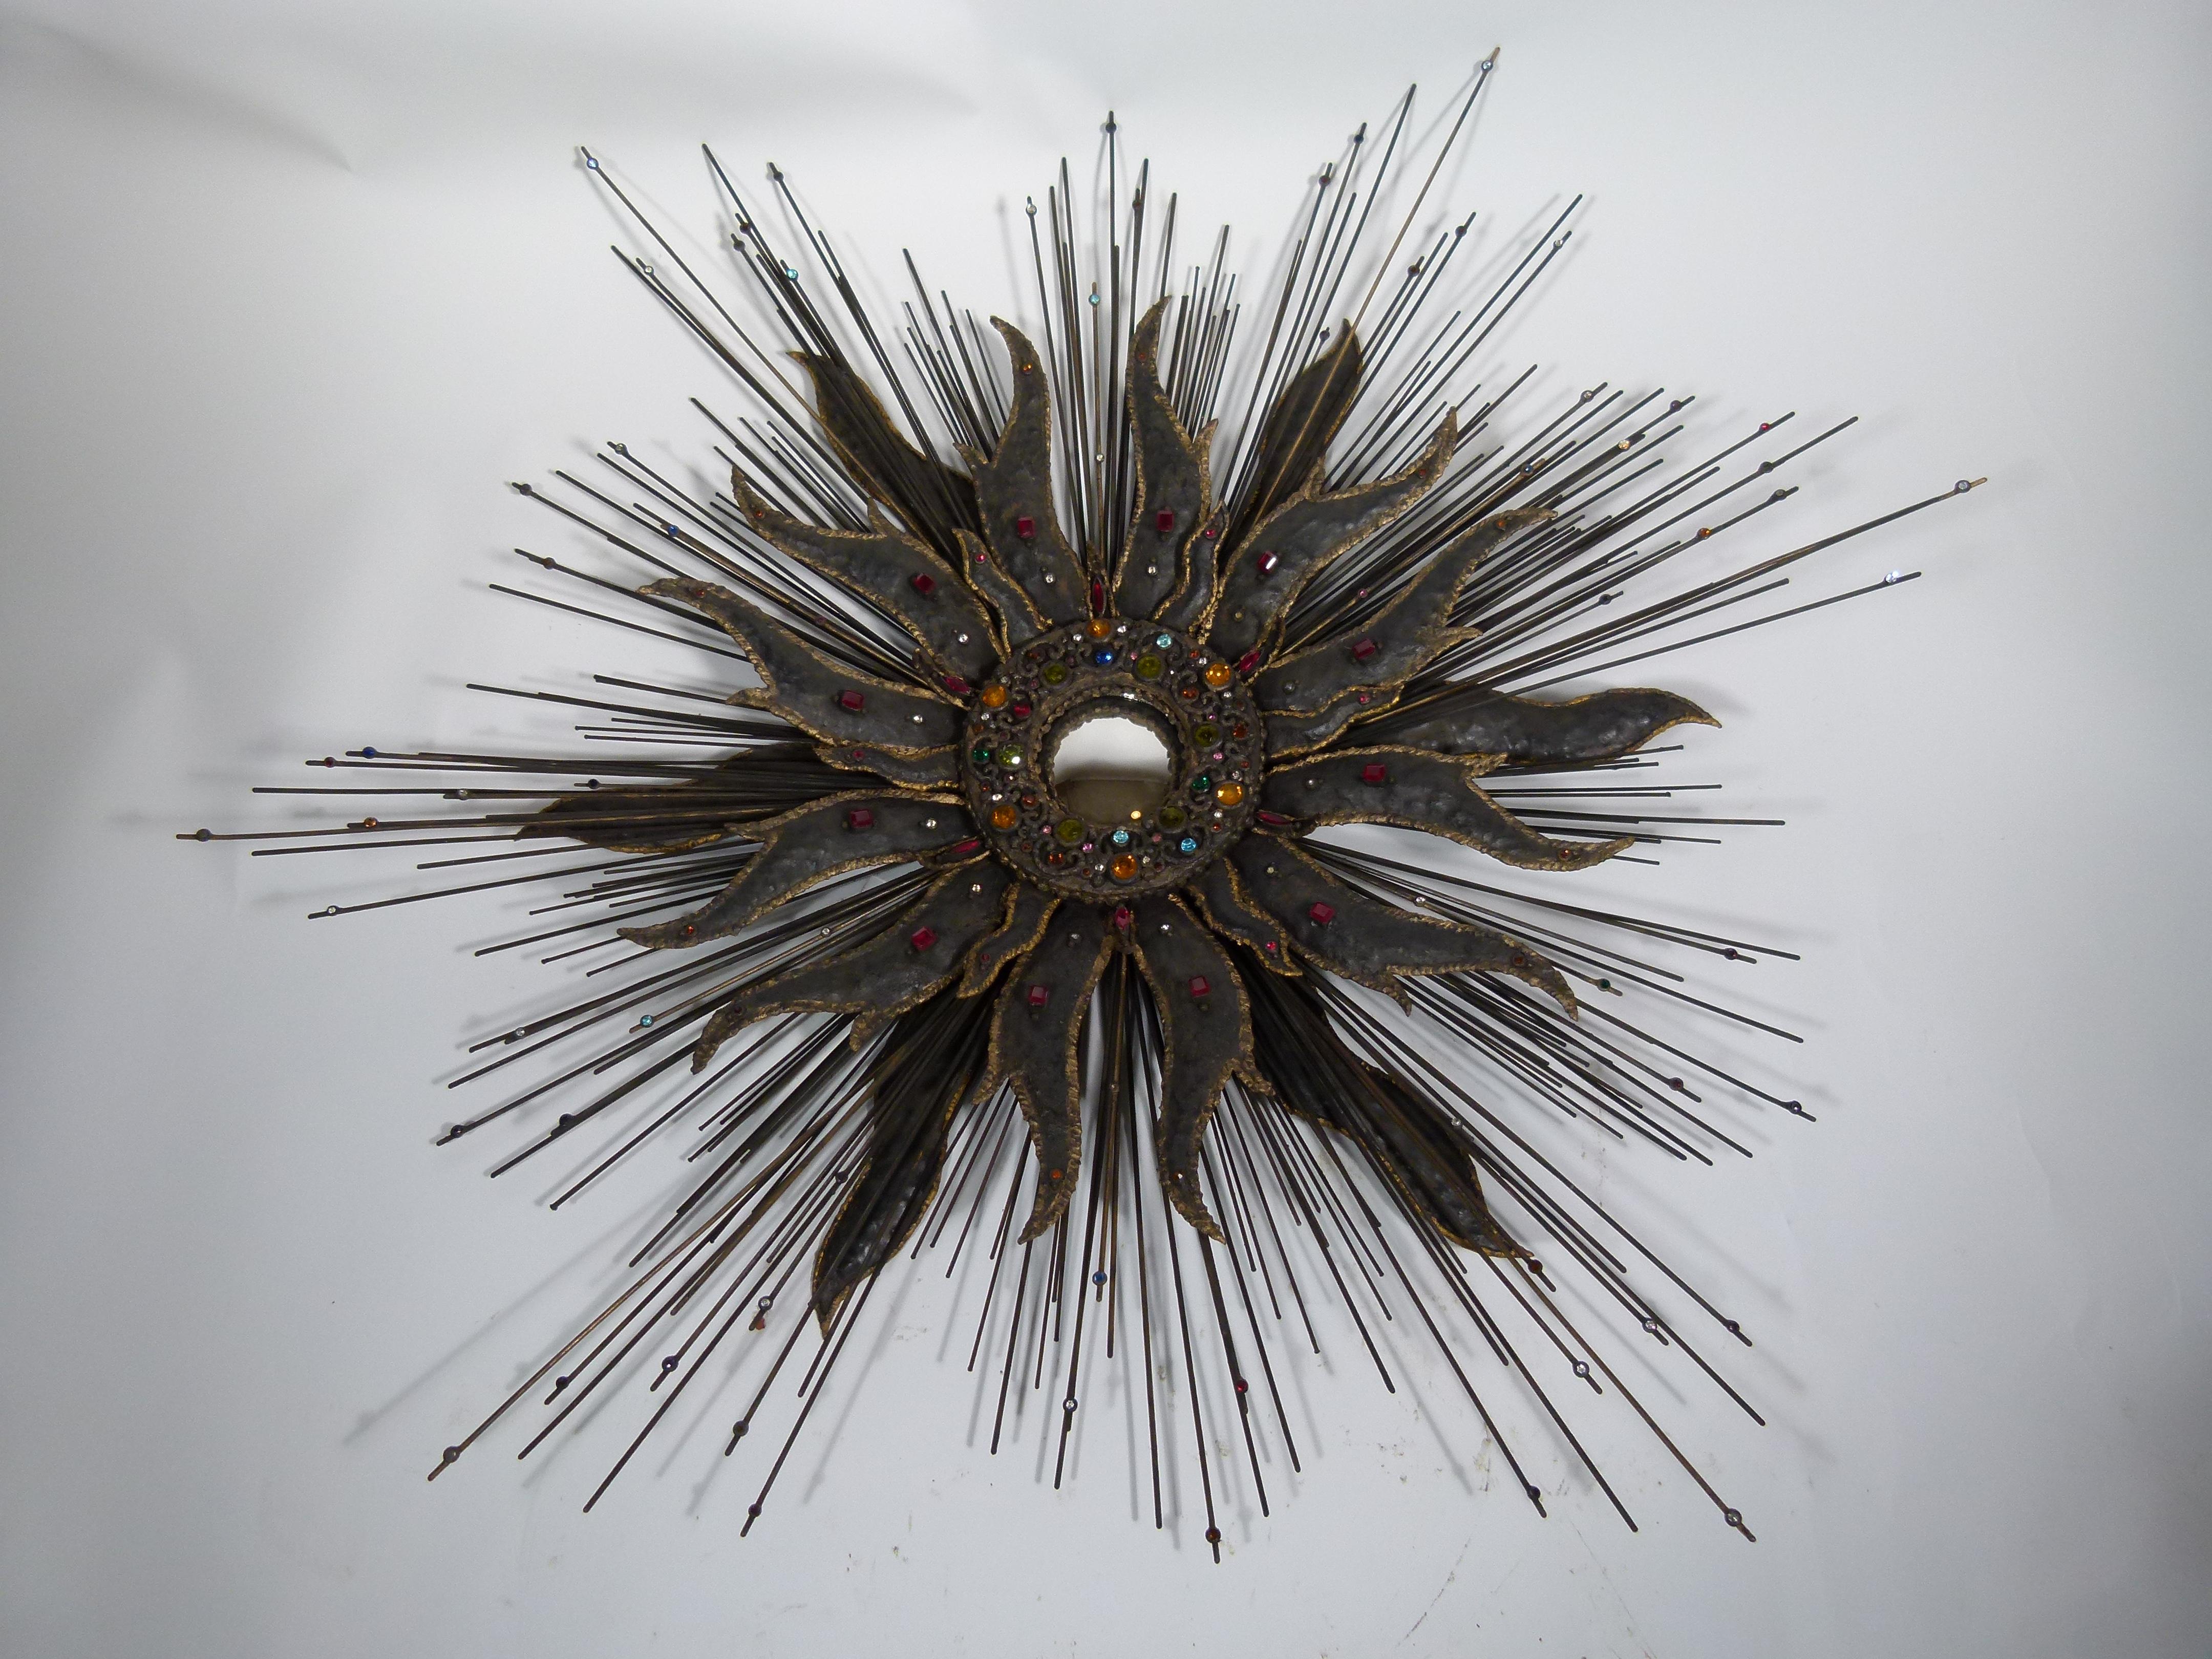 Amazing modern French sunburst mirror. The tiny central mirror is surrounded by a large iron sunburst with small crystals of different colors enlightening and decorating it.

Mirror size: 9cm (3.5 in) diameter.